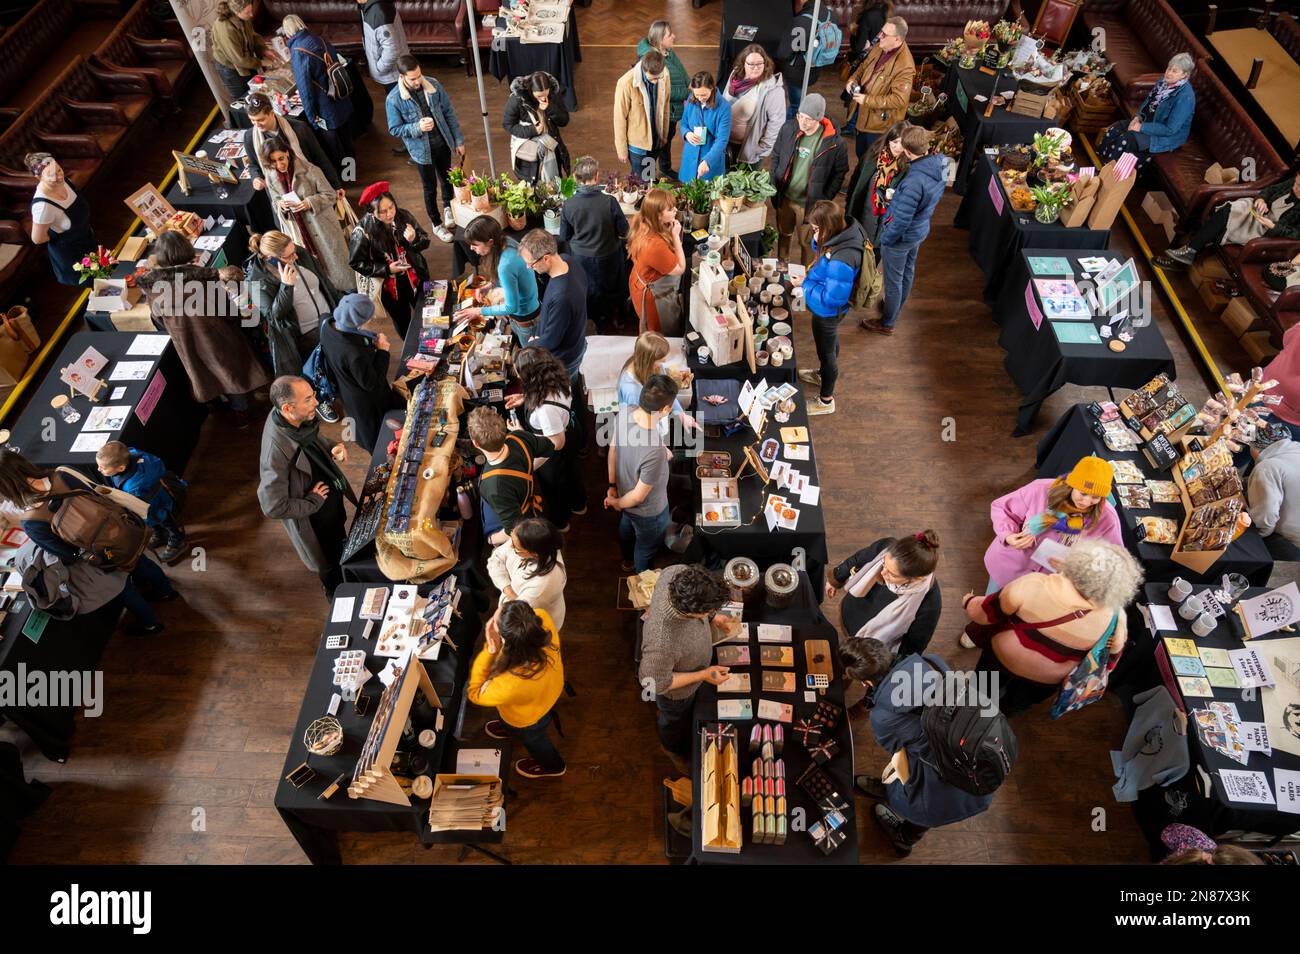 Cambridge, UK. 11th Feb, 2023. People enjoy the Cambridge Chocolate Festival in the historic Cambridge University Union Society Debating Chamber. The two day event includes tastings, talks and stallholders selling artisan chocolates. Credit: Julian Eales/Alamy Live News Stock Photo